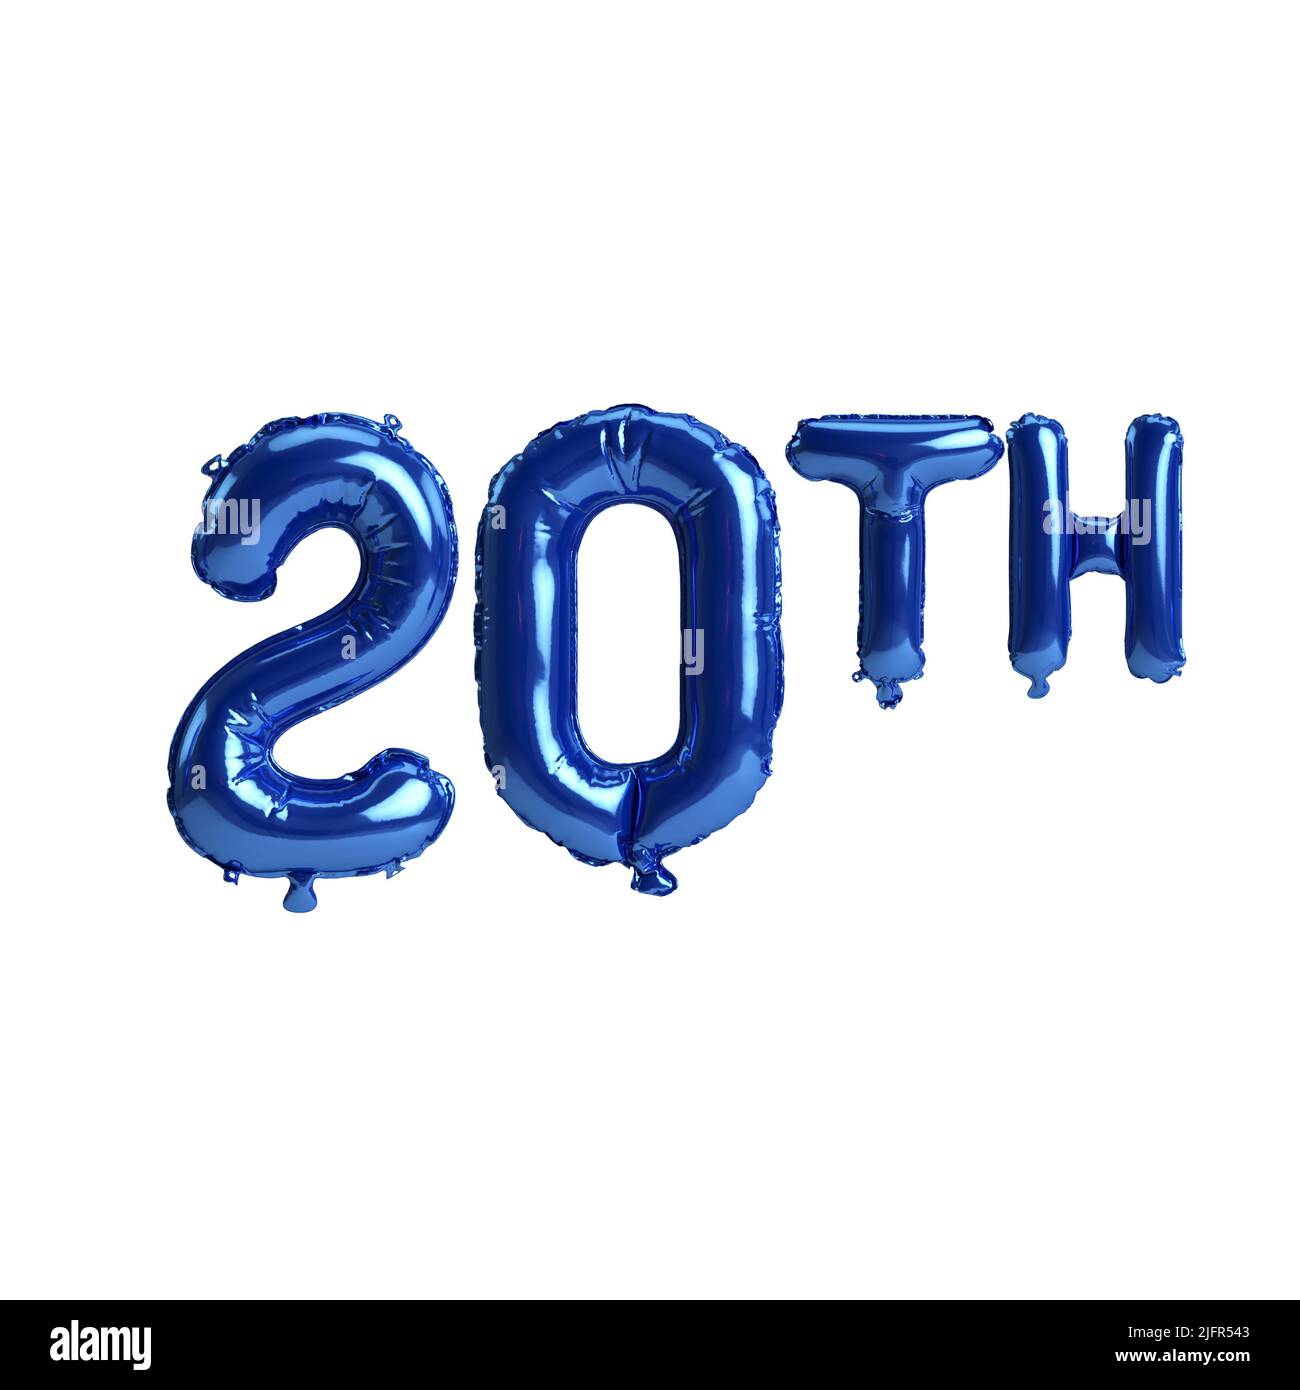 3d illustration of 20th blue balloons isolated on white background Stock Photo